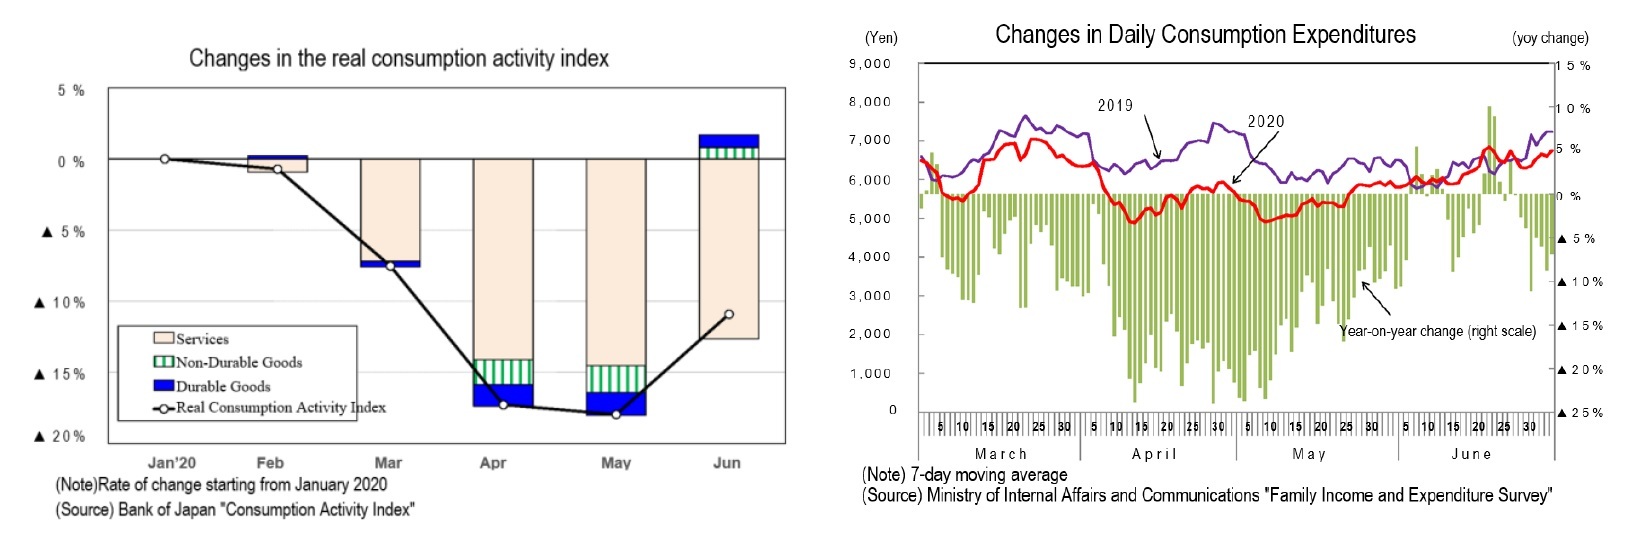 Changes in the real consumption activity index/Changes in Daily consumption Expenditures